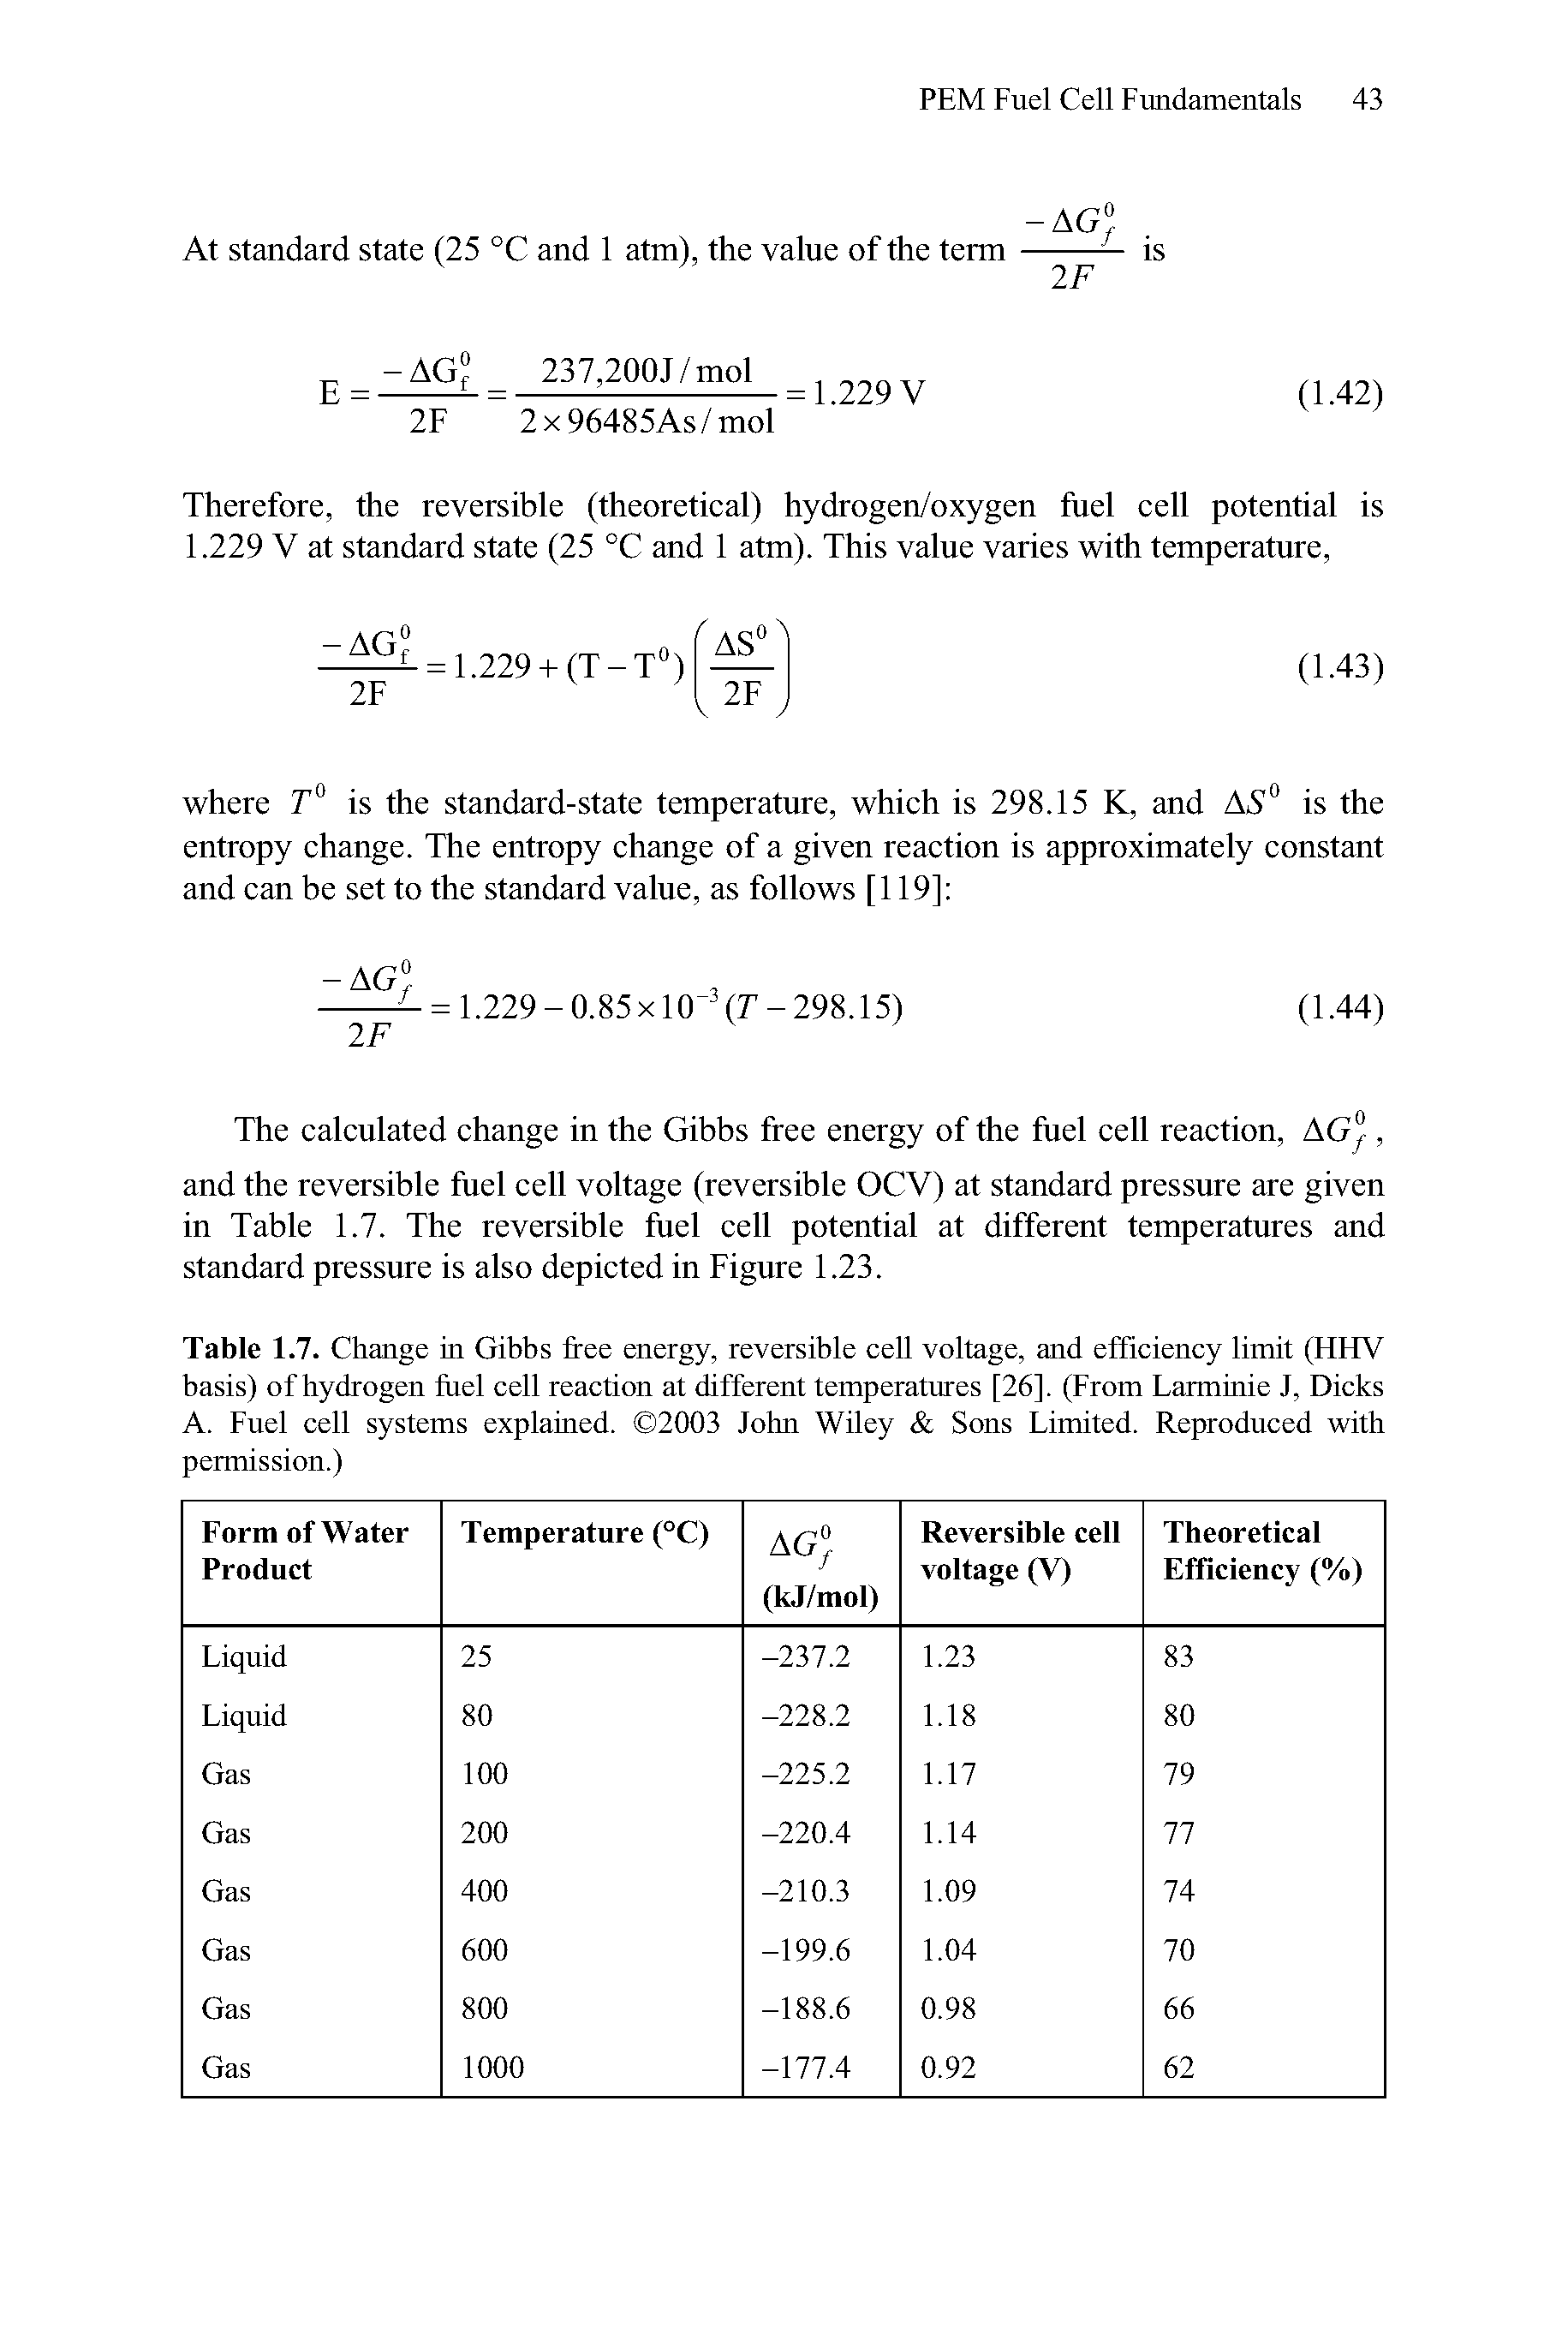 Table 1.7. Change in Gibbs free energy, reversible cell voltage, and efficiency limit (HHV basis) of hydrogen fuel cell reaction at different temperatures [26]. (From Larminie J, Dicks A. Fuel cell systems explained. 32003 John Wiley Sons Limited. Reproduced with permission.)...